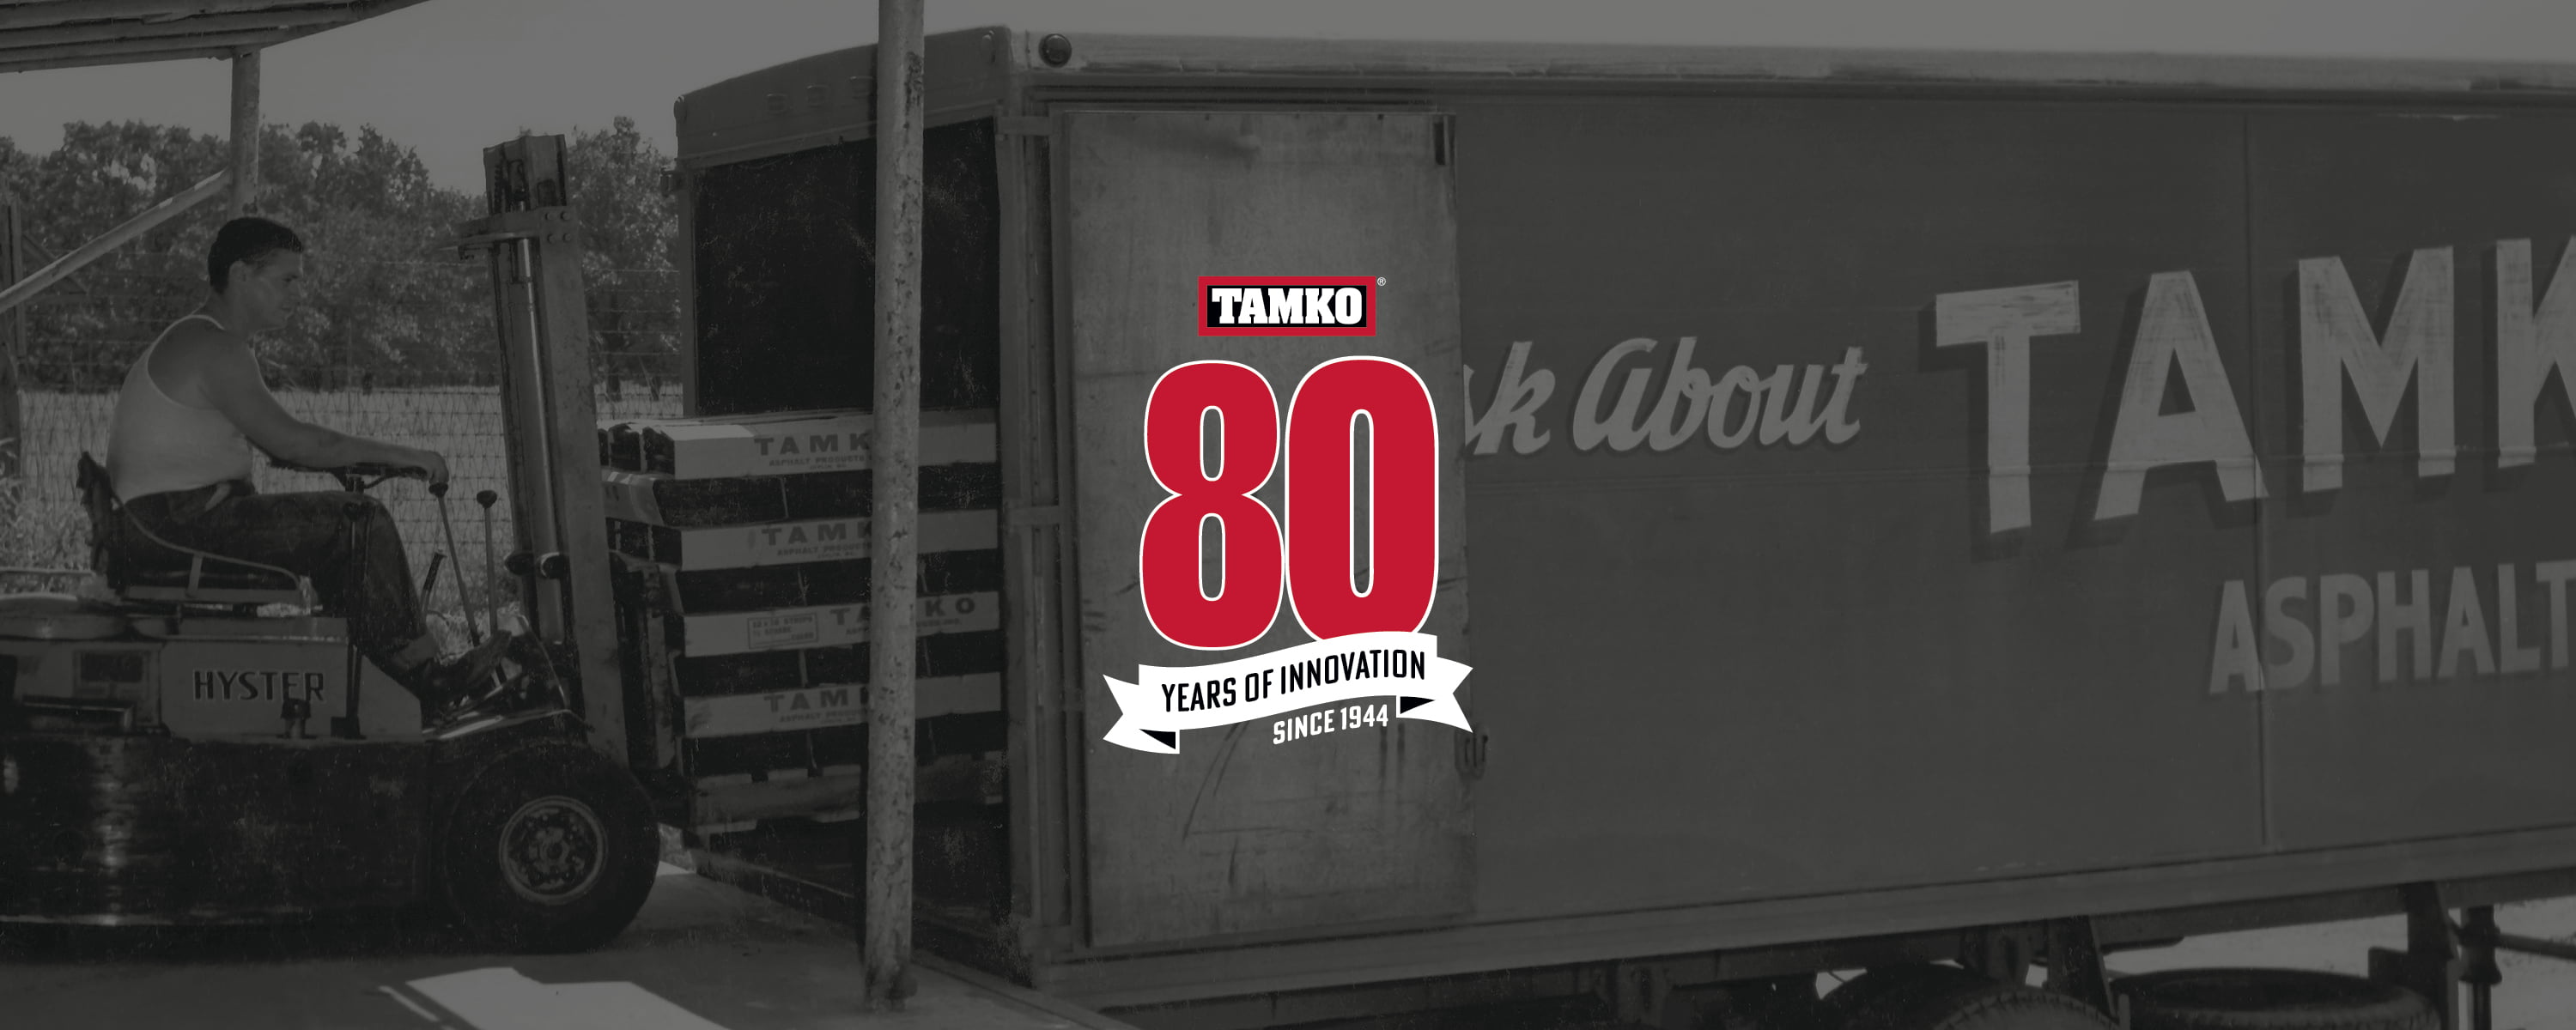 TAMKO - 80 Years of Innovation